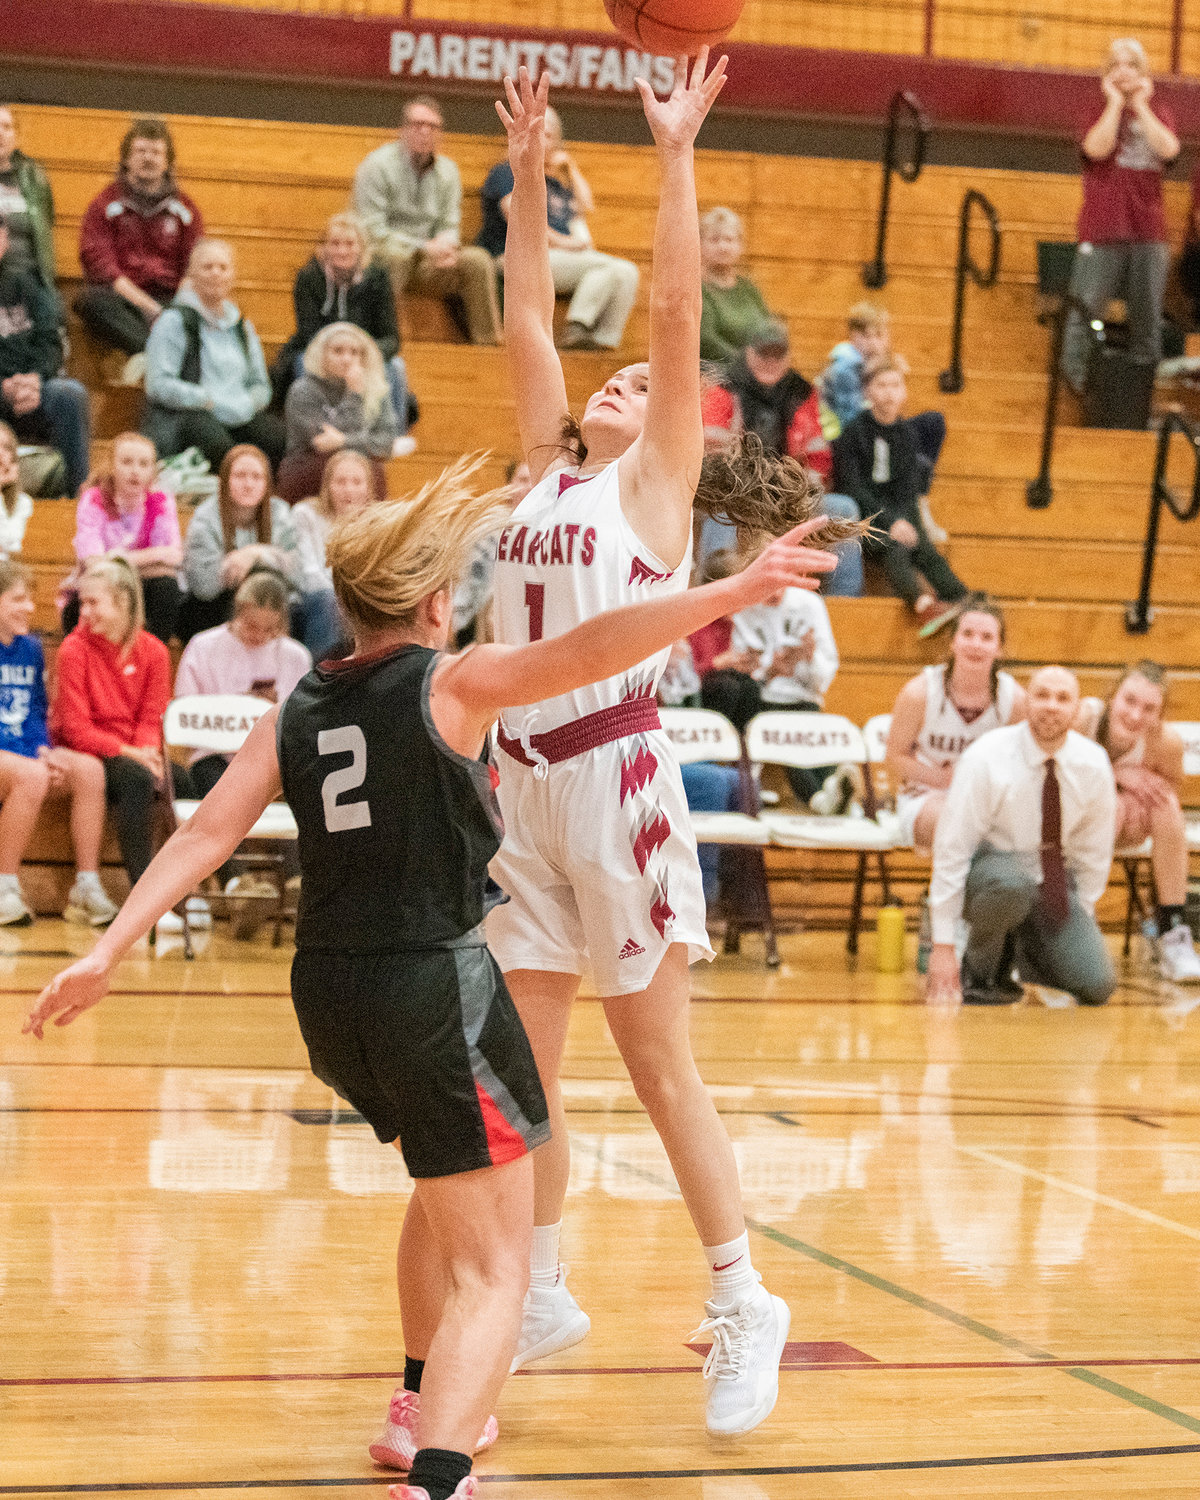 Bearcat freshman Hadley Hoffman (1) puts up a shot during a game against R.A. Long Tuesday night in Chehalis.